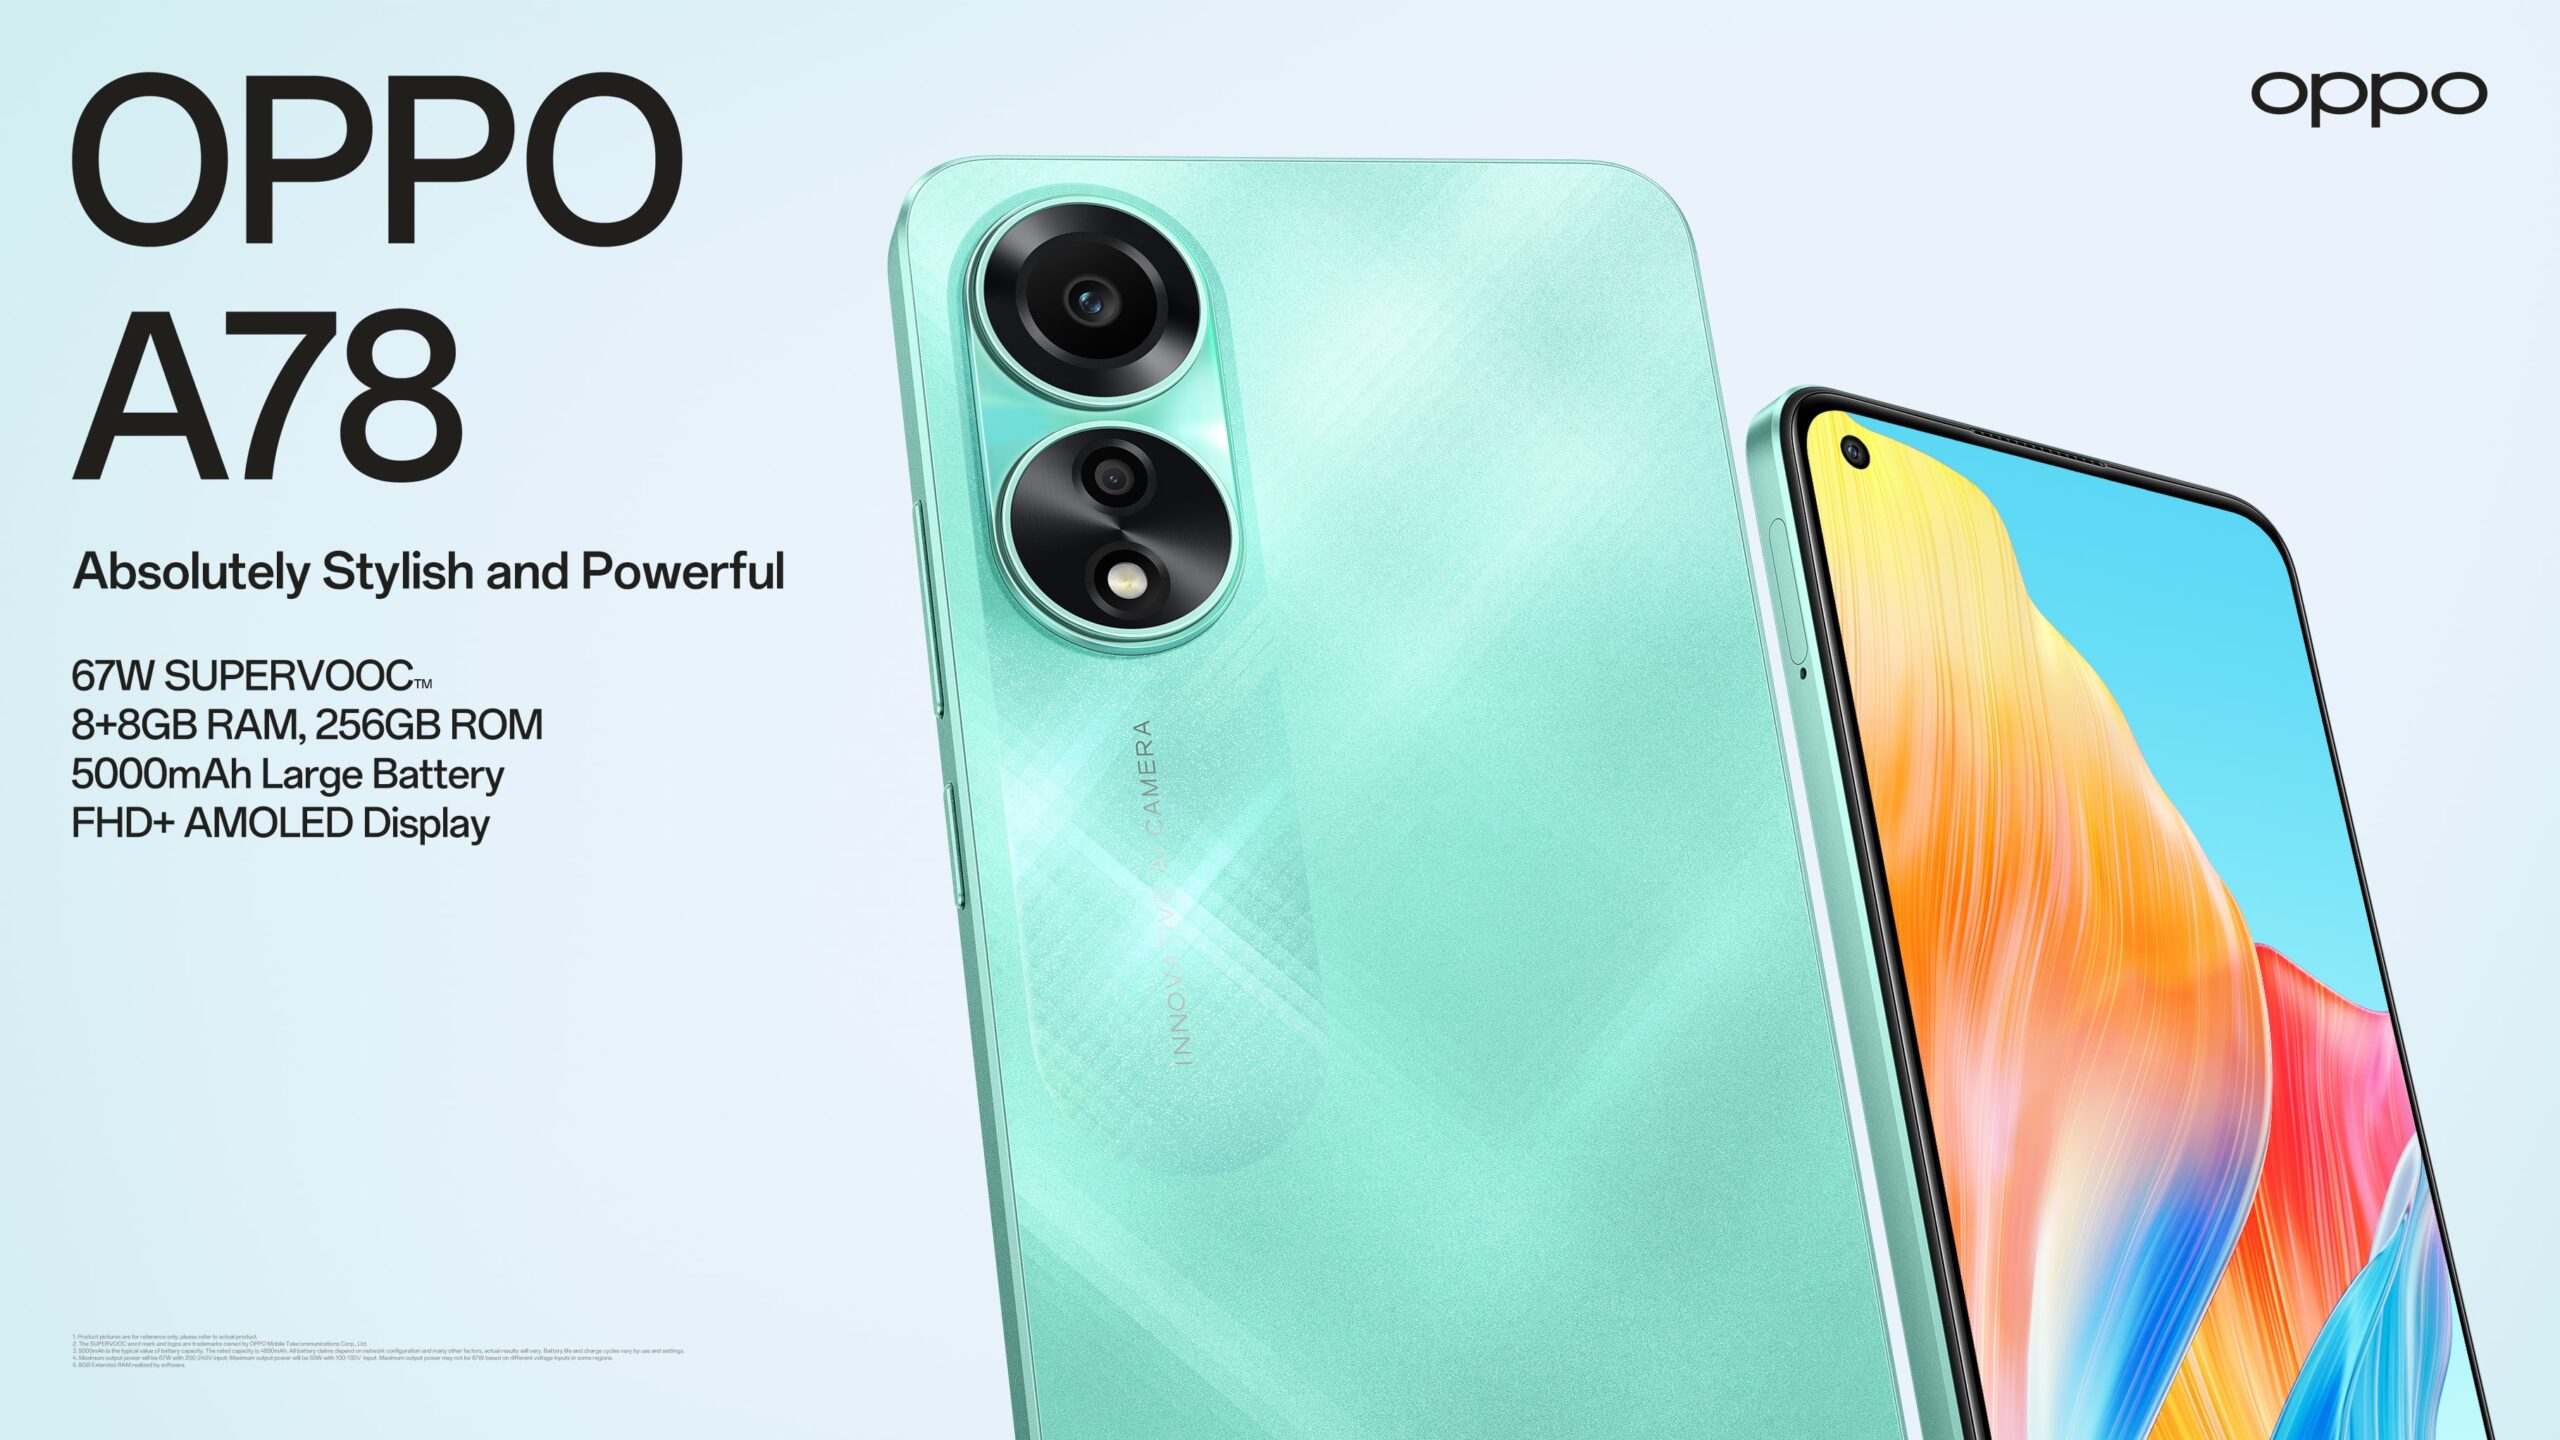 Leading global smart device brand OPPO adds the value-for-money OPPO A78 to its stylish and powerful A Series.